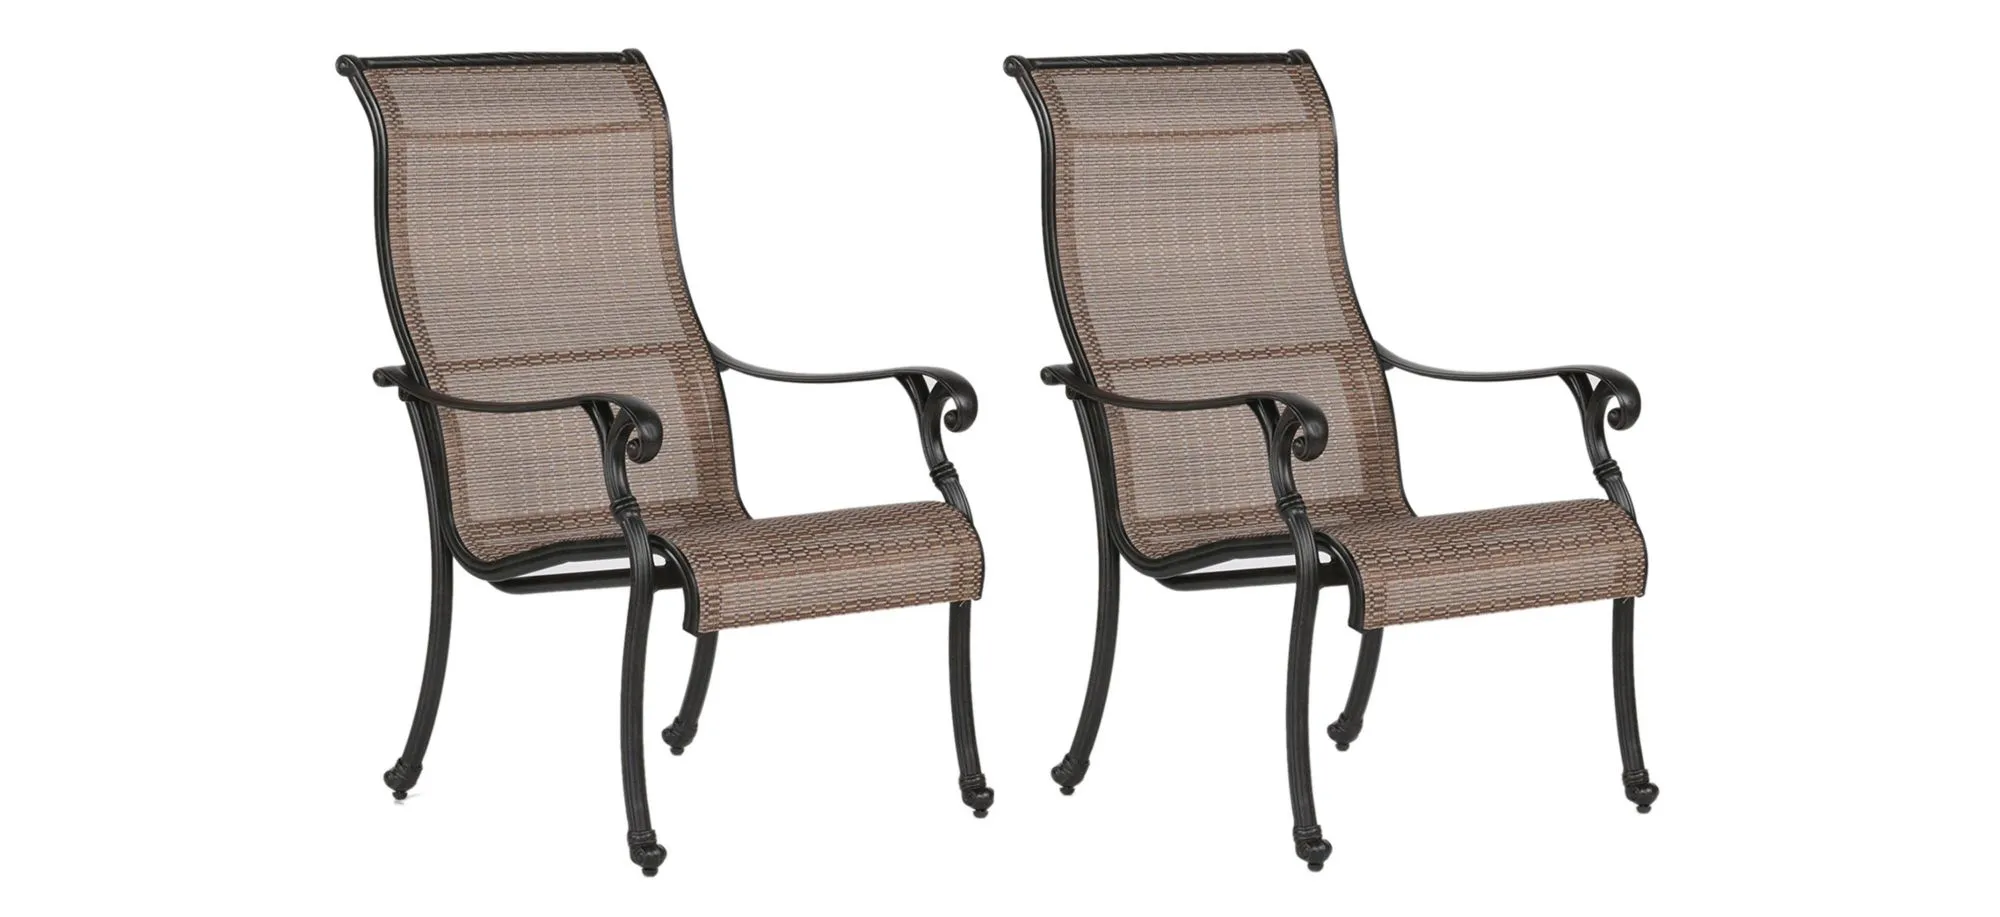 Castle Rock Outdoor Sling Dining Chair, Set of 2 in Gray by Bellanest